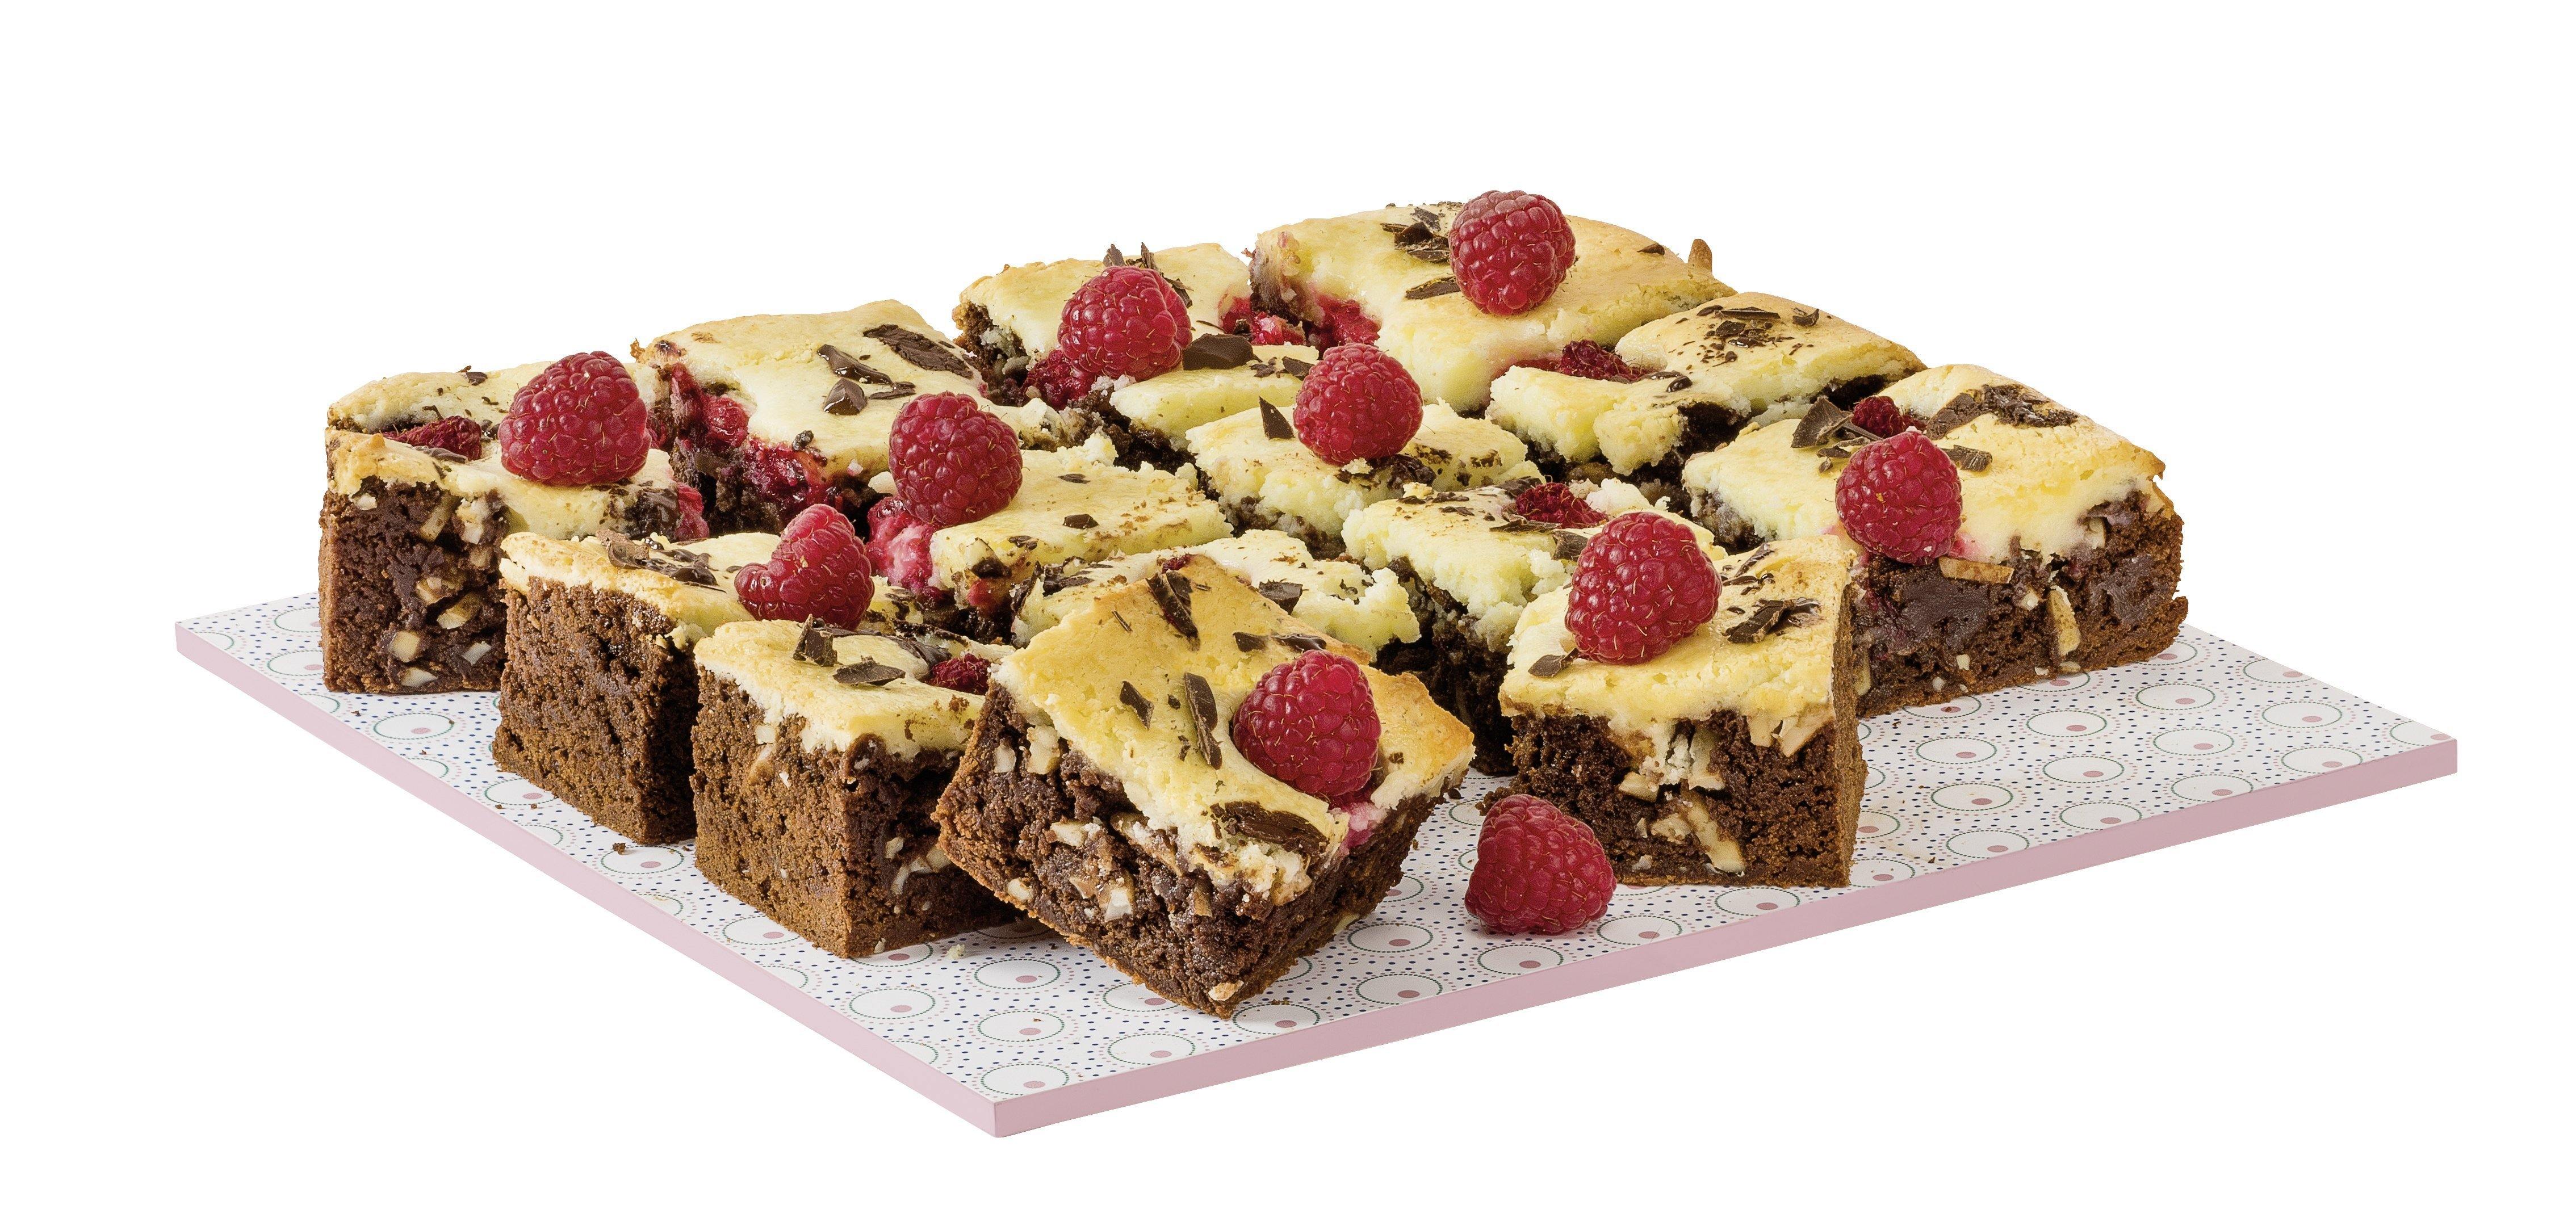 Dr. Oetker "Retro" Brownie Tin, Rose/CrÃ¨me, 28X26X5 Cm - Whole and All